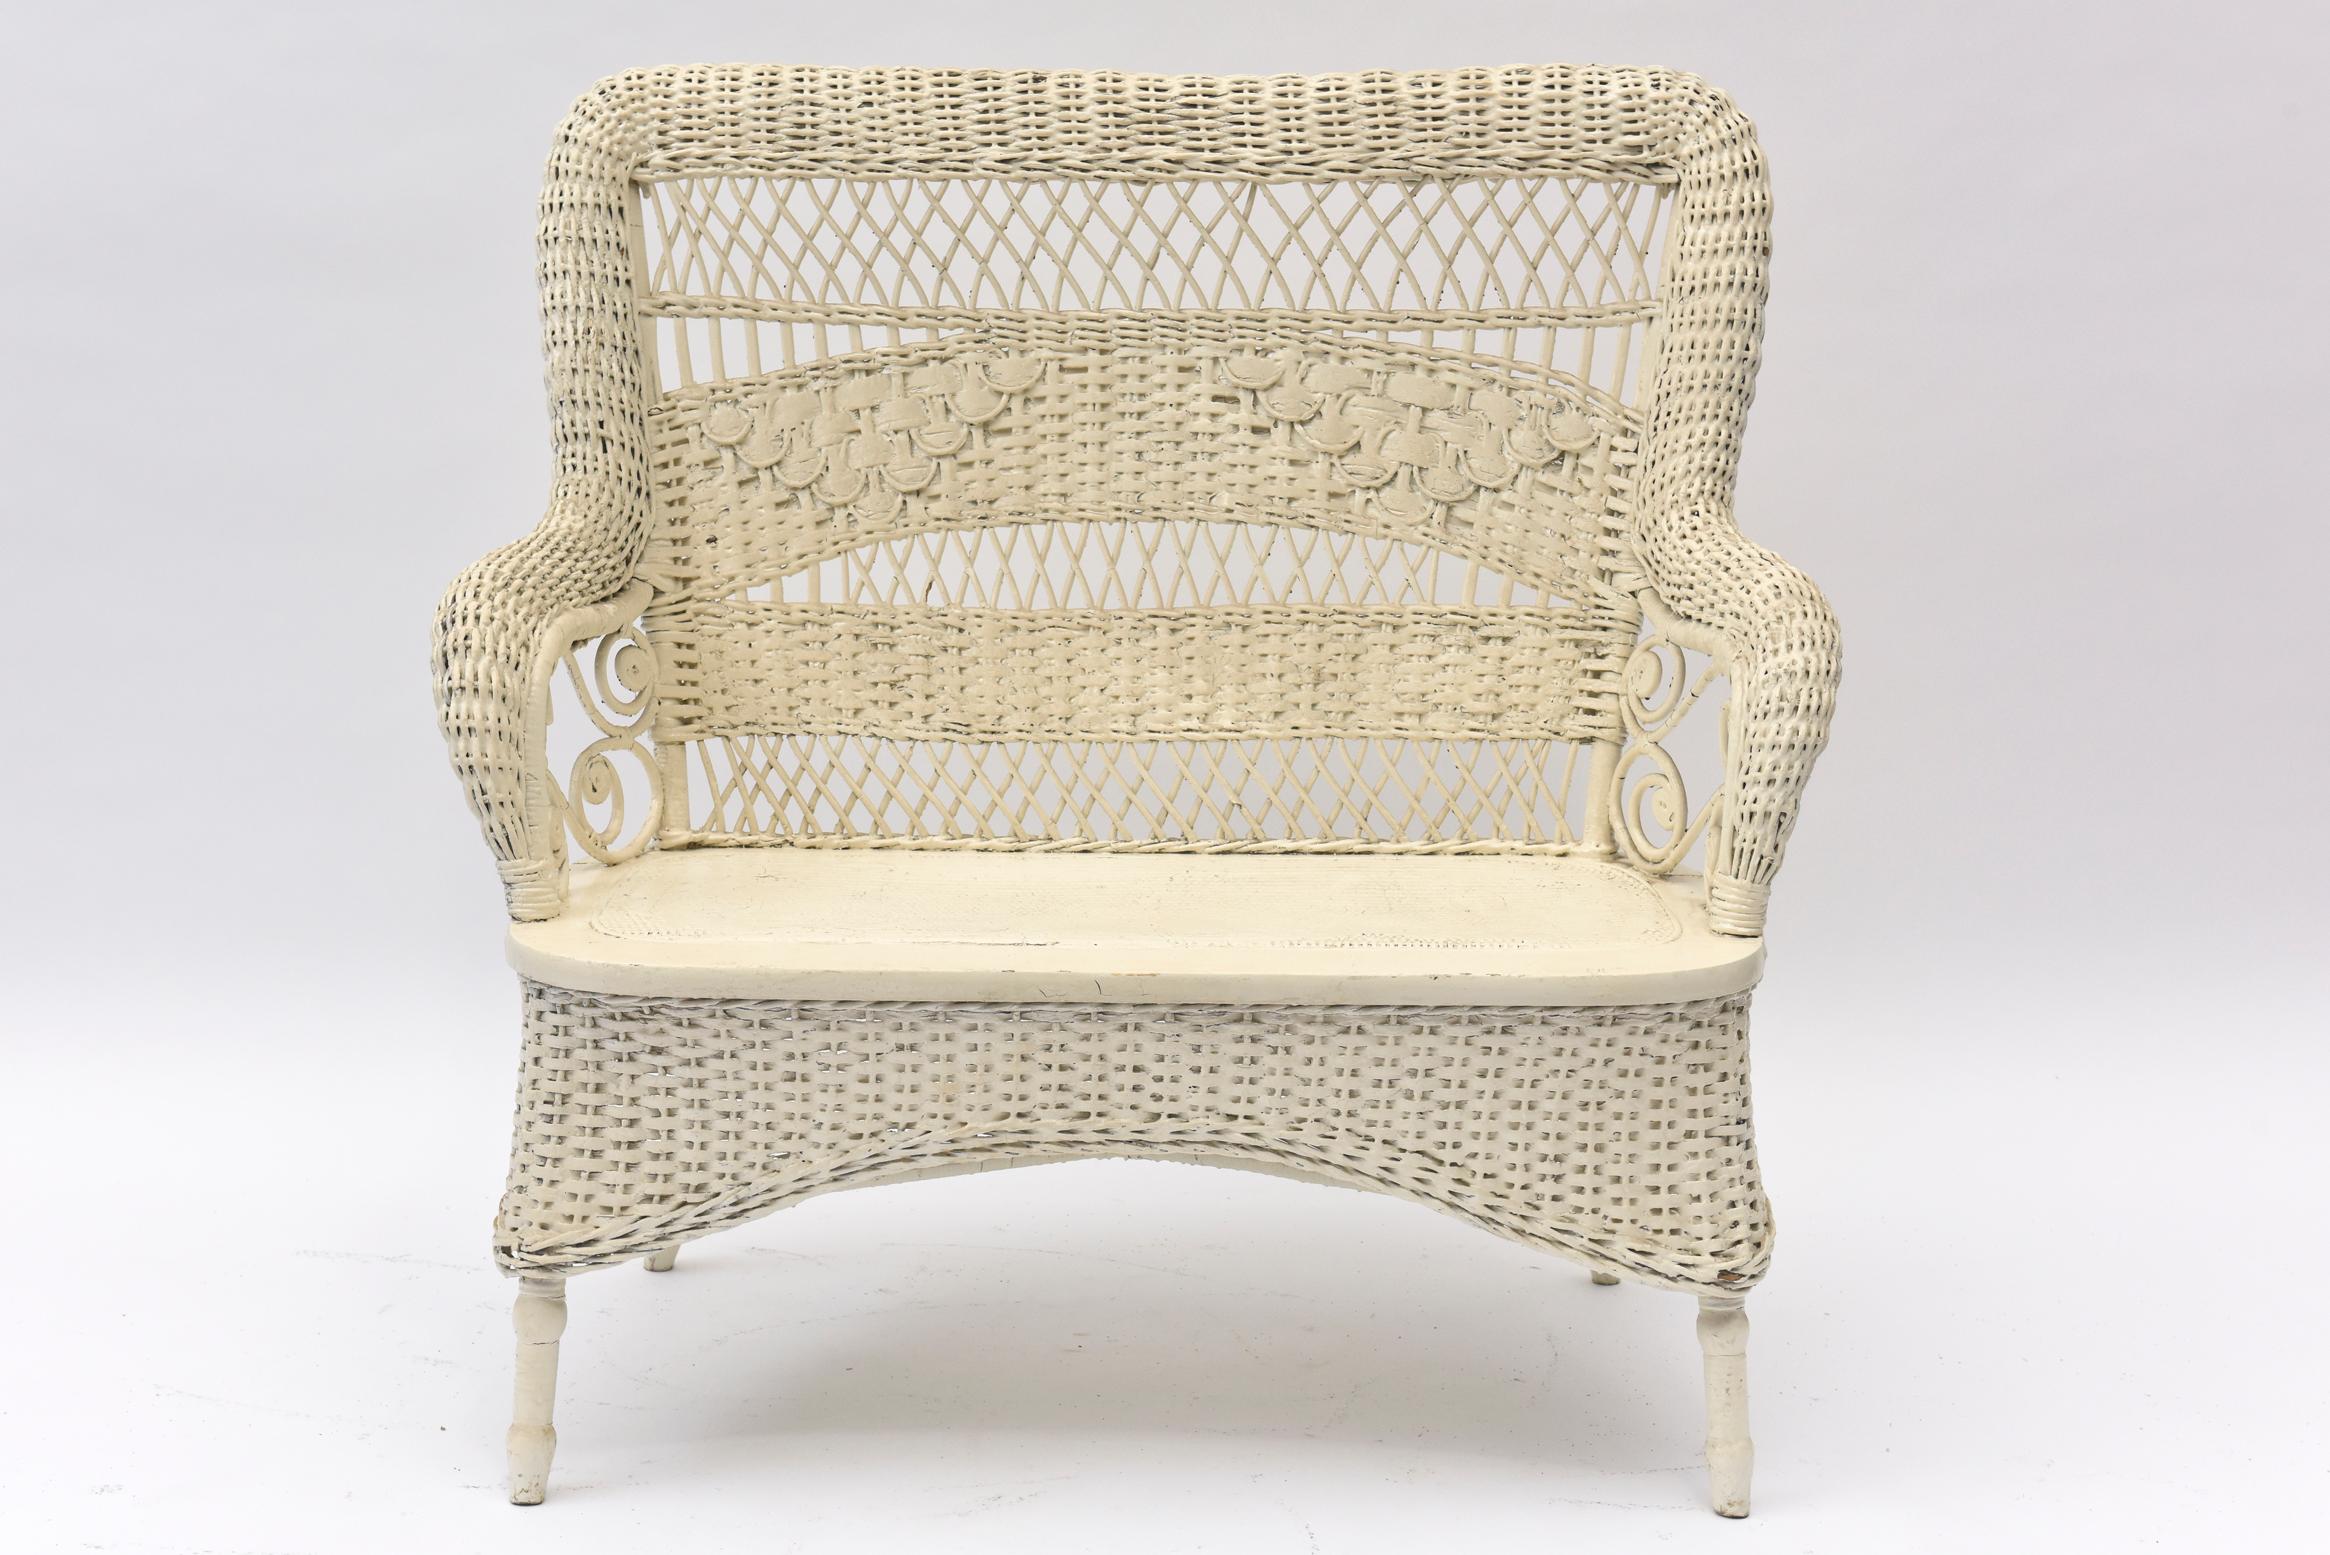 Part of a large collection of ornate Victorian wicker that was collected over the years by a Senator's wife. This rolled woven arm loveseat has wicker curlicues in the open areas under the side arm rests. Across the back are alternating lattice